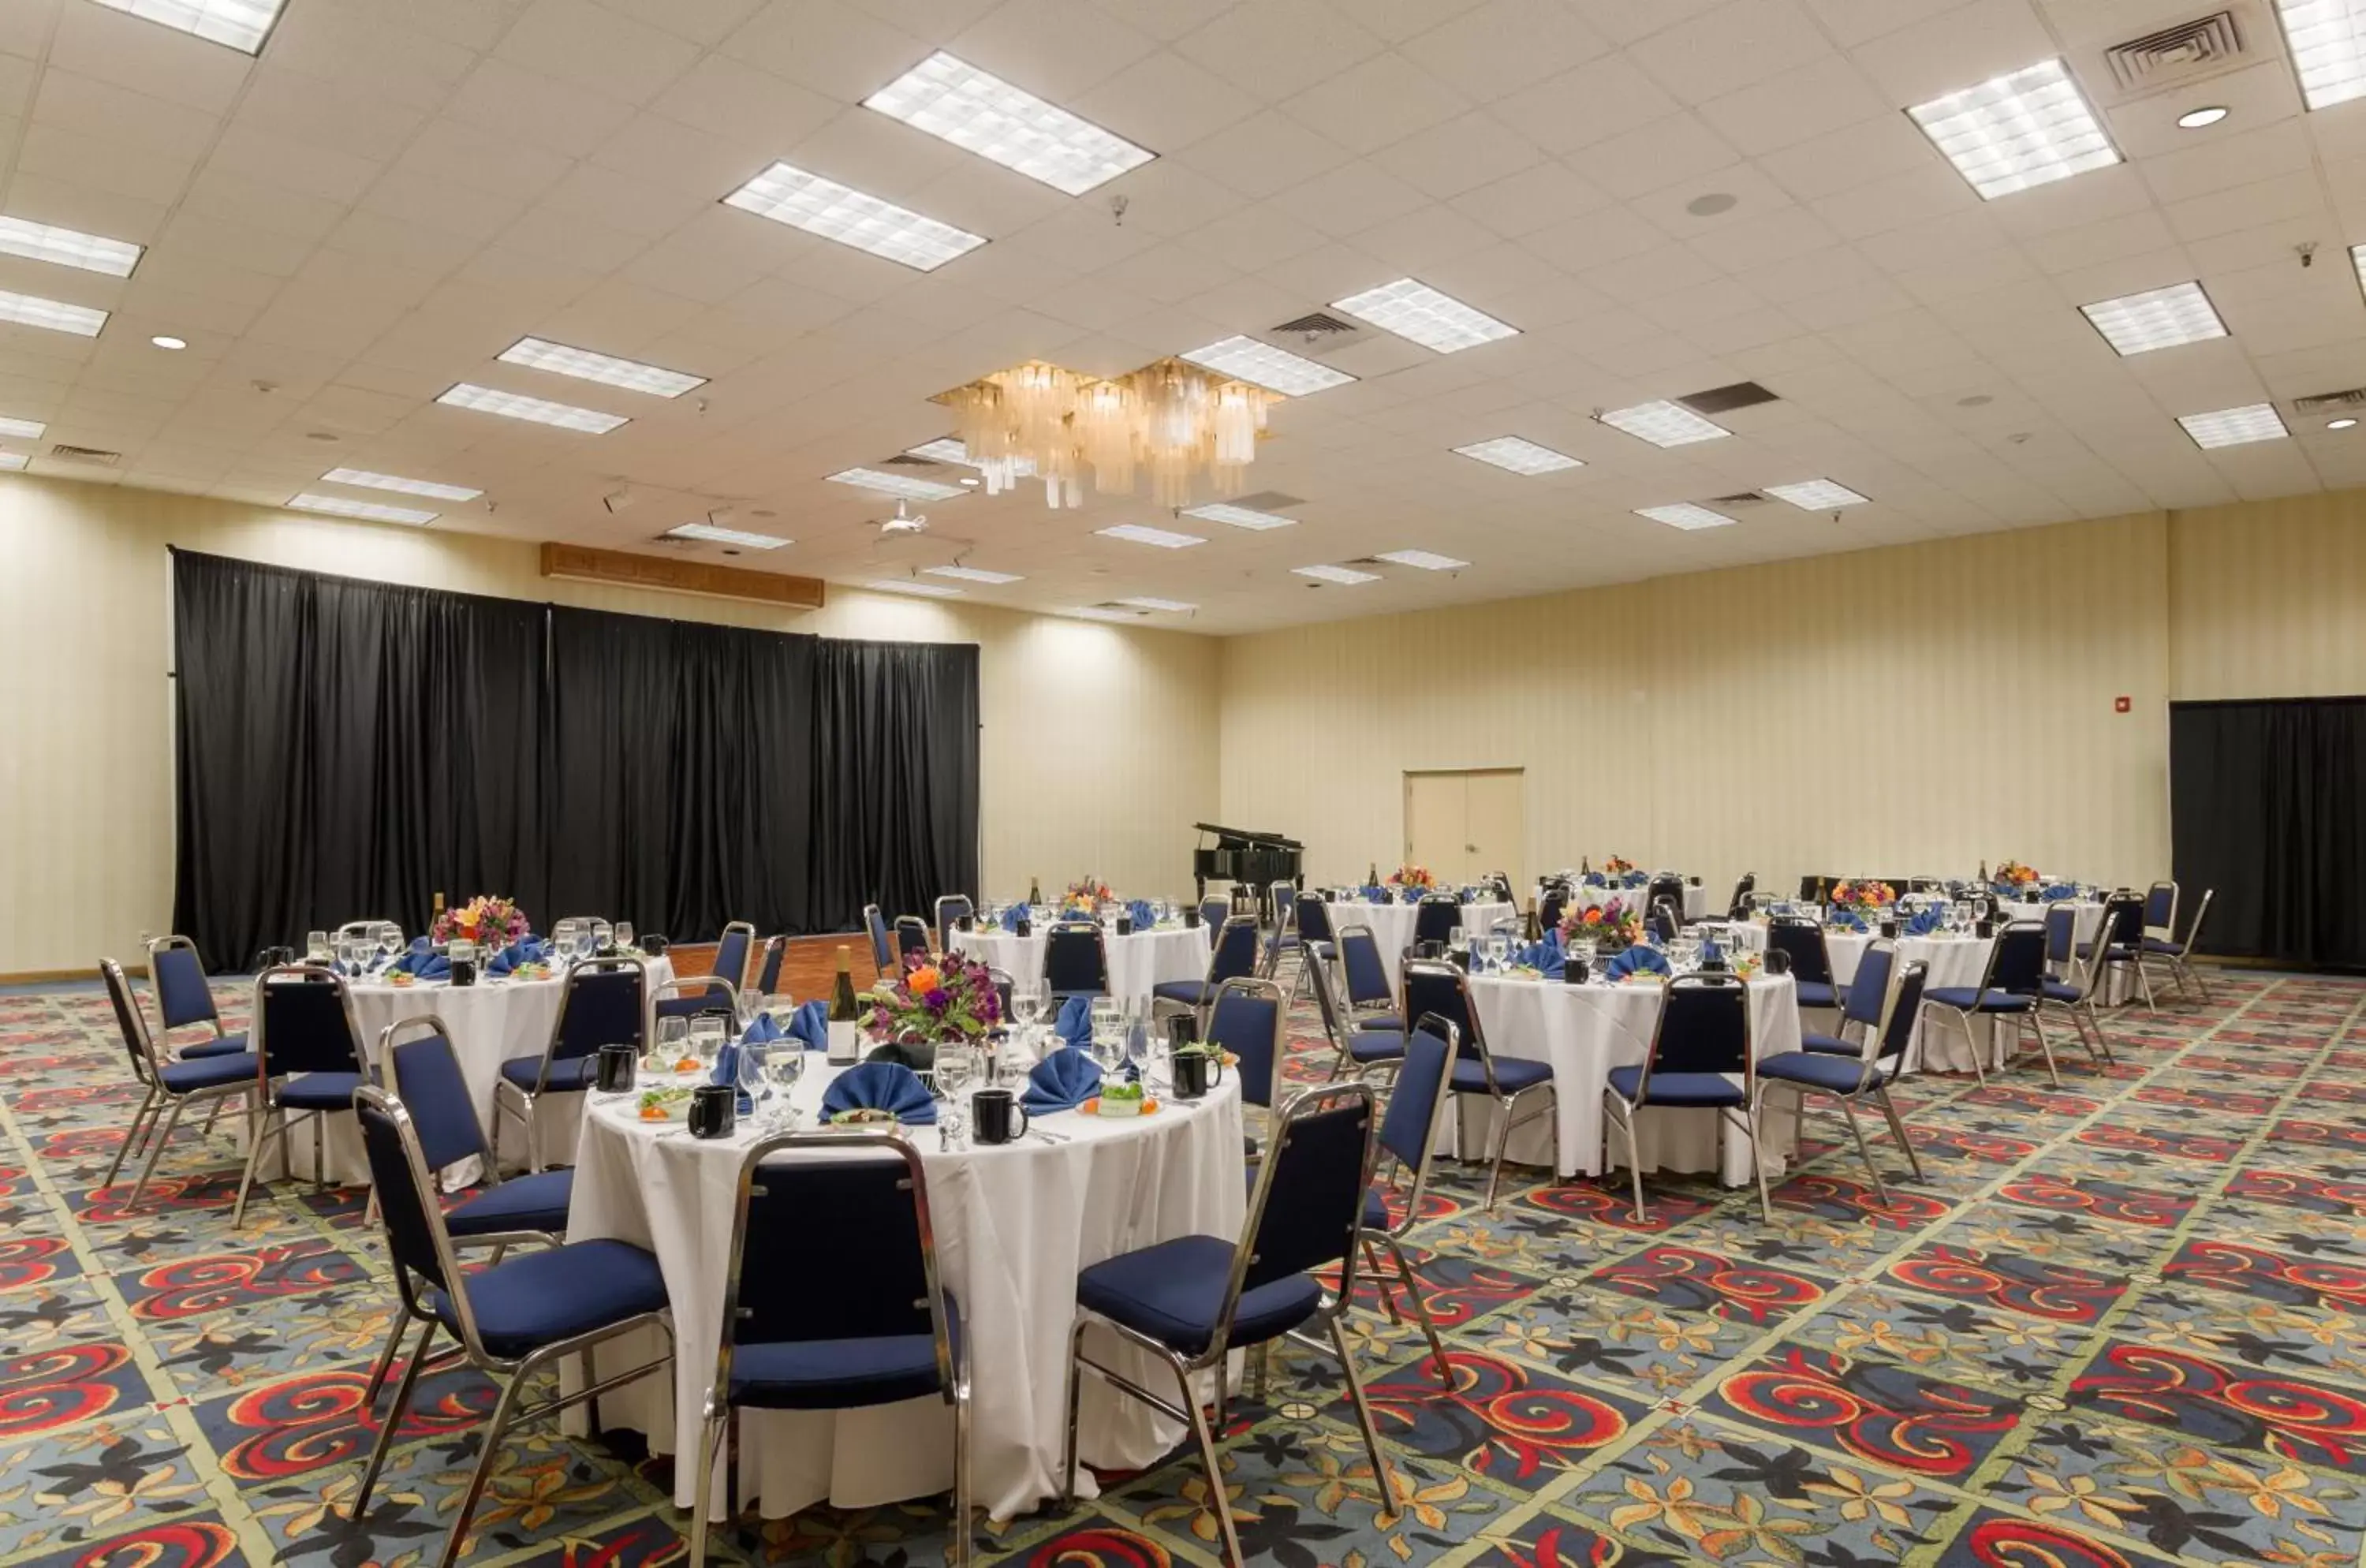 Meeting/conference room, Banquet Facilities in Red Lion Hotel Cheyenne